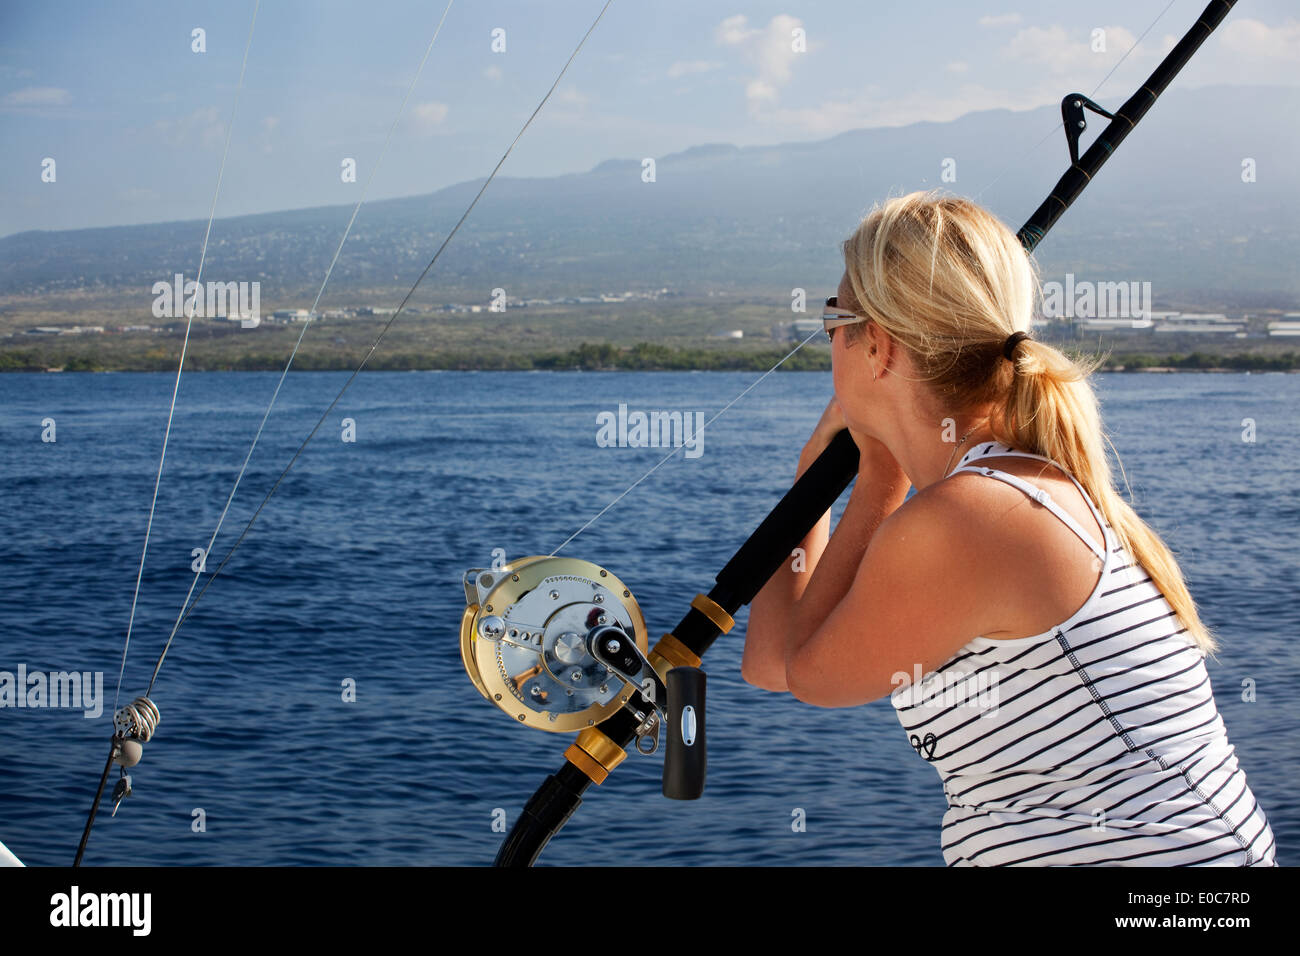 A woman lost in her thoughts watches the shore of Kona, Hawaii in the distance Stock Photo